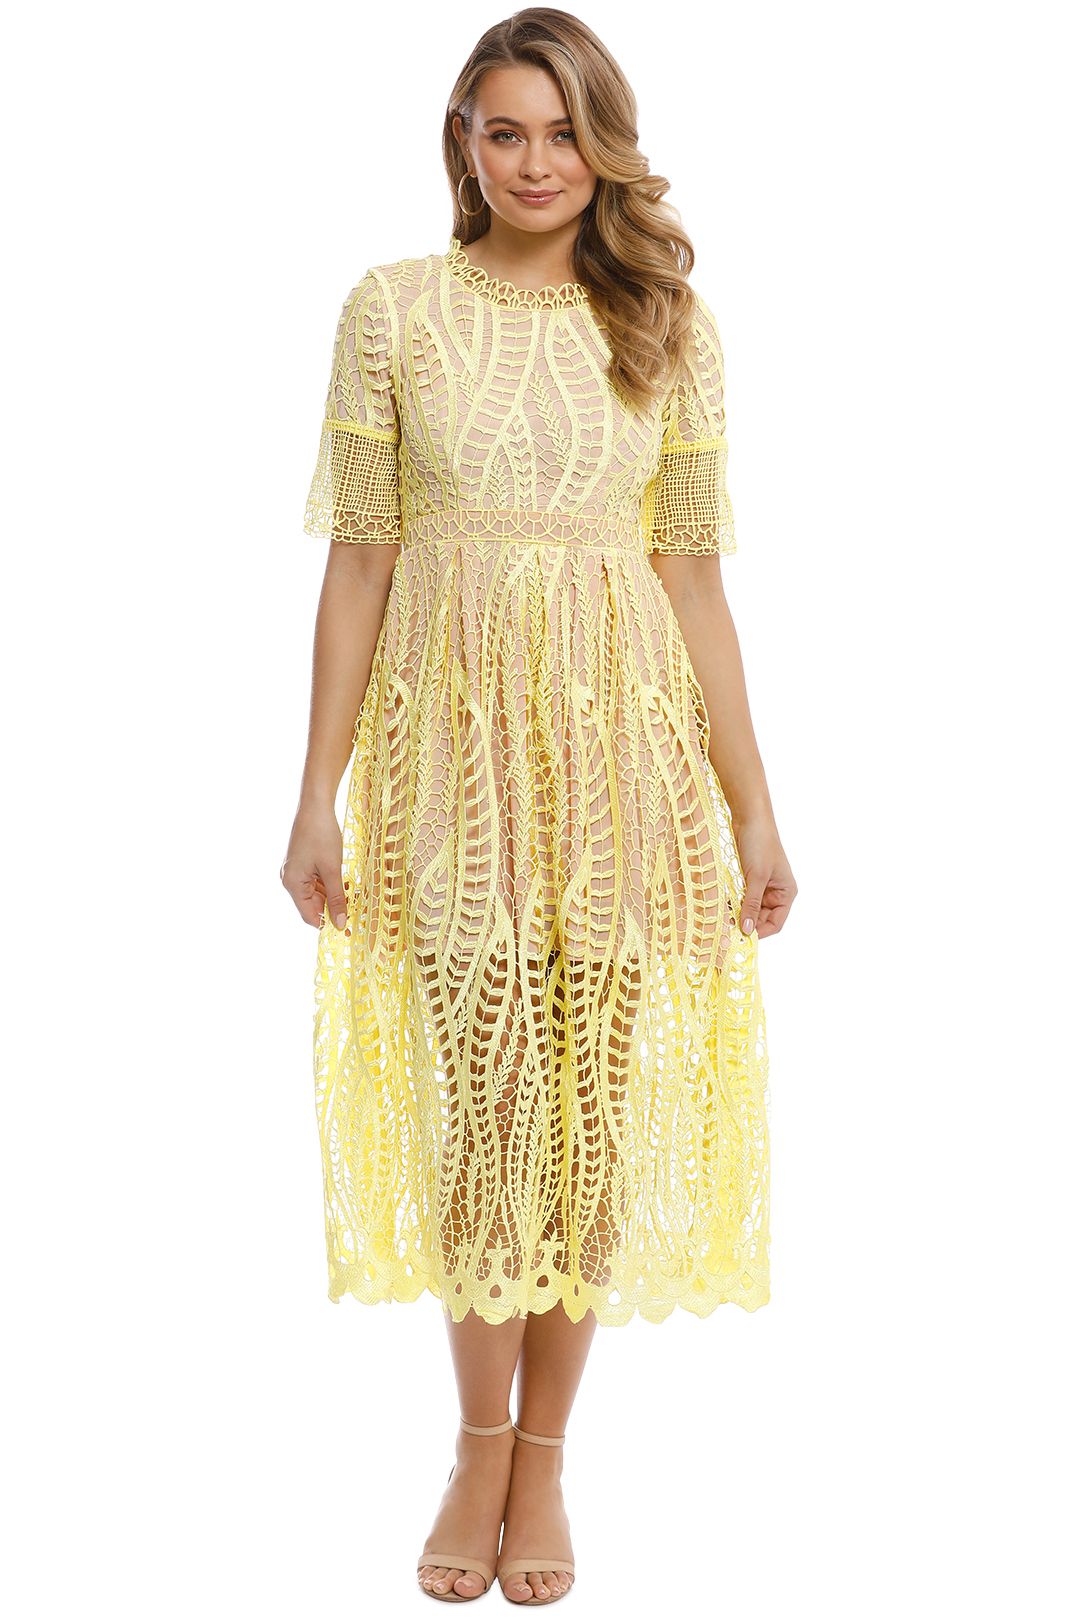 Mossman - The revival Dress - Yellow - Front